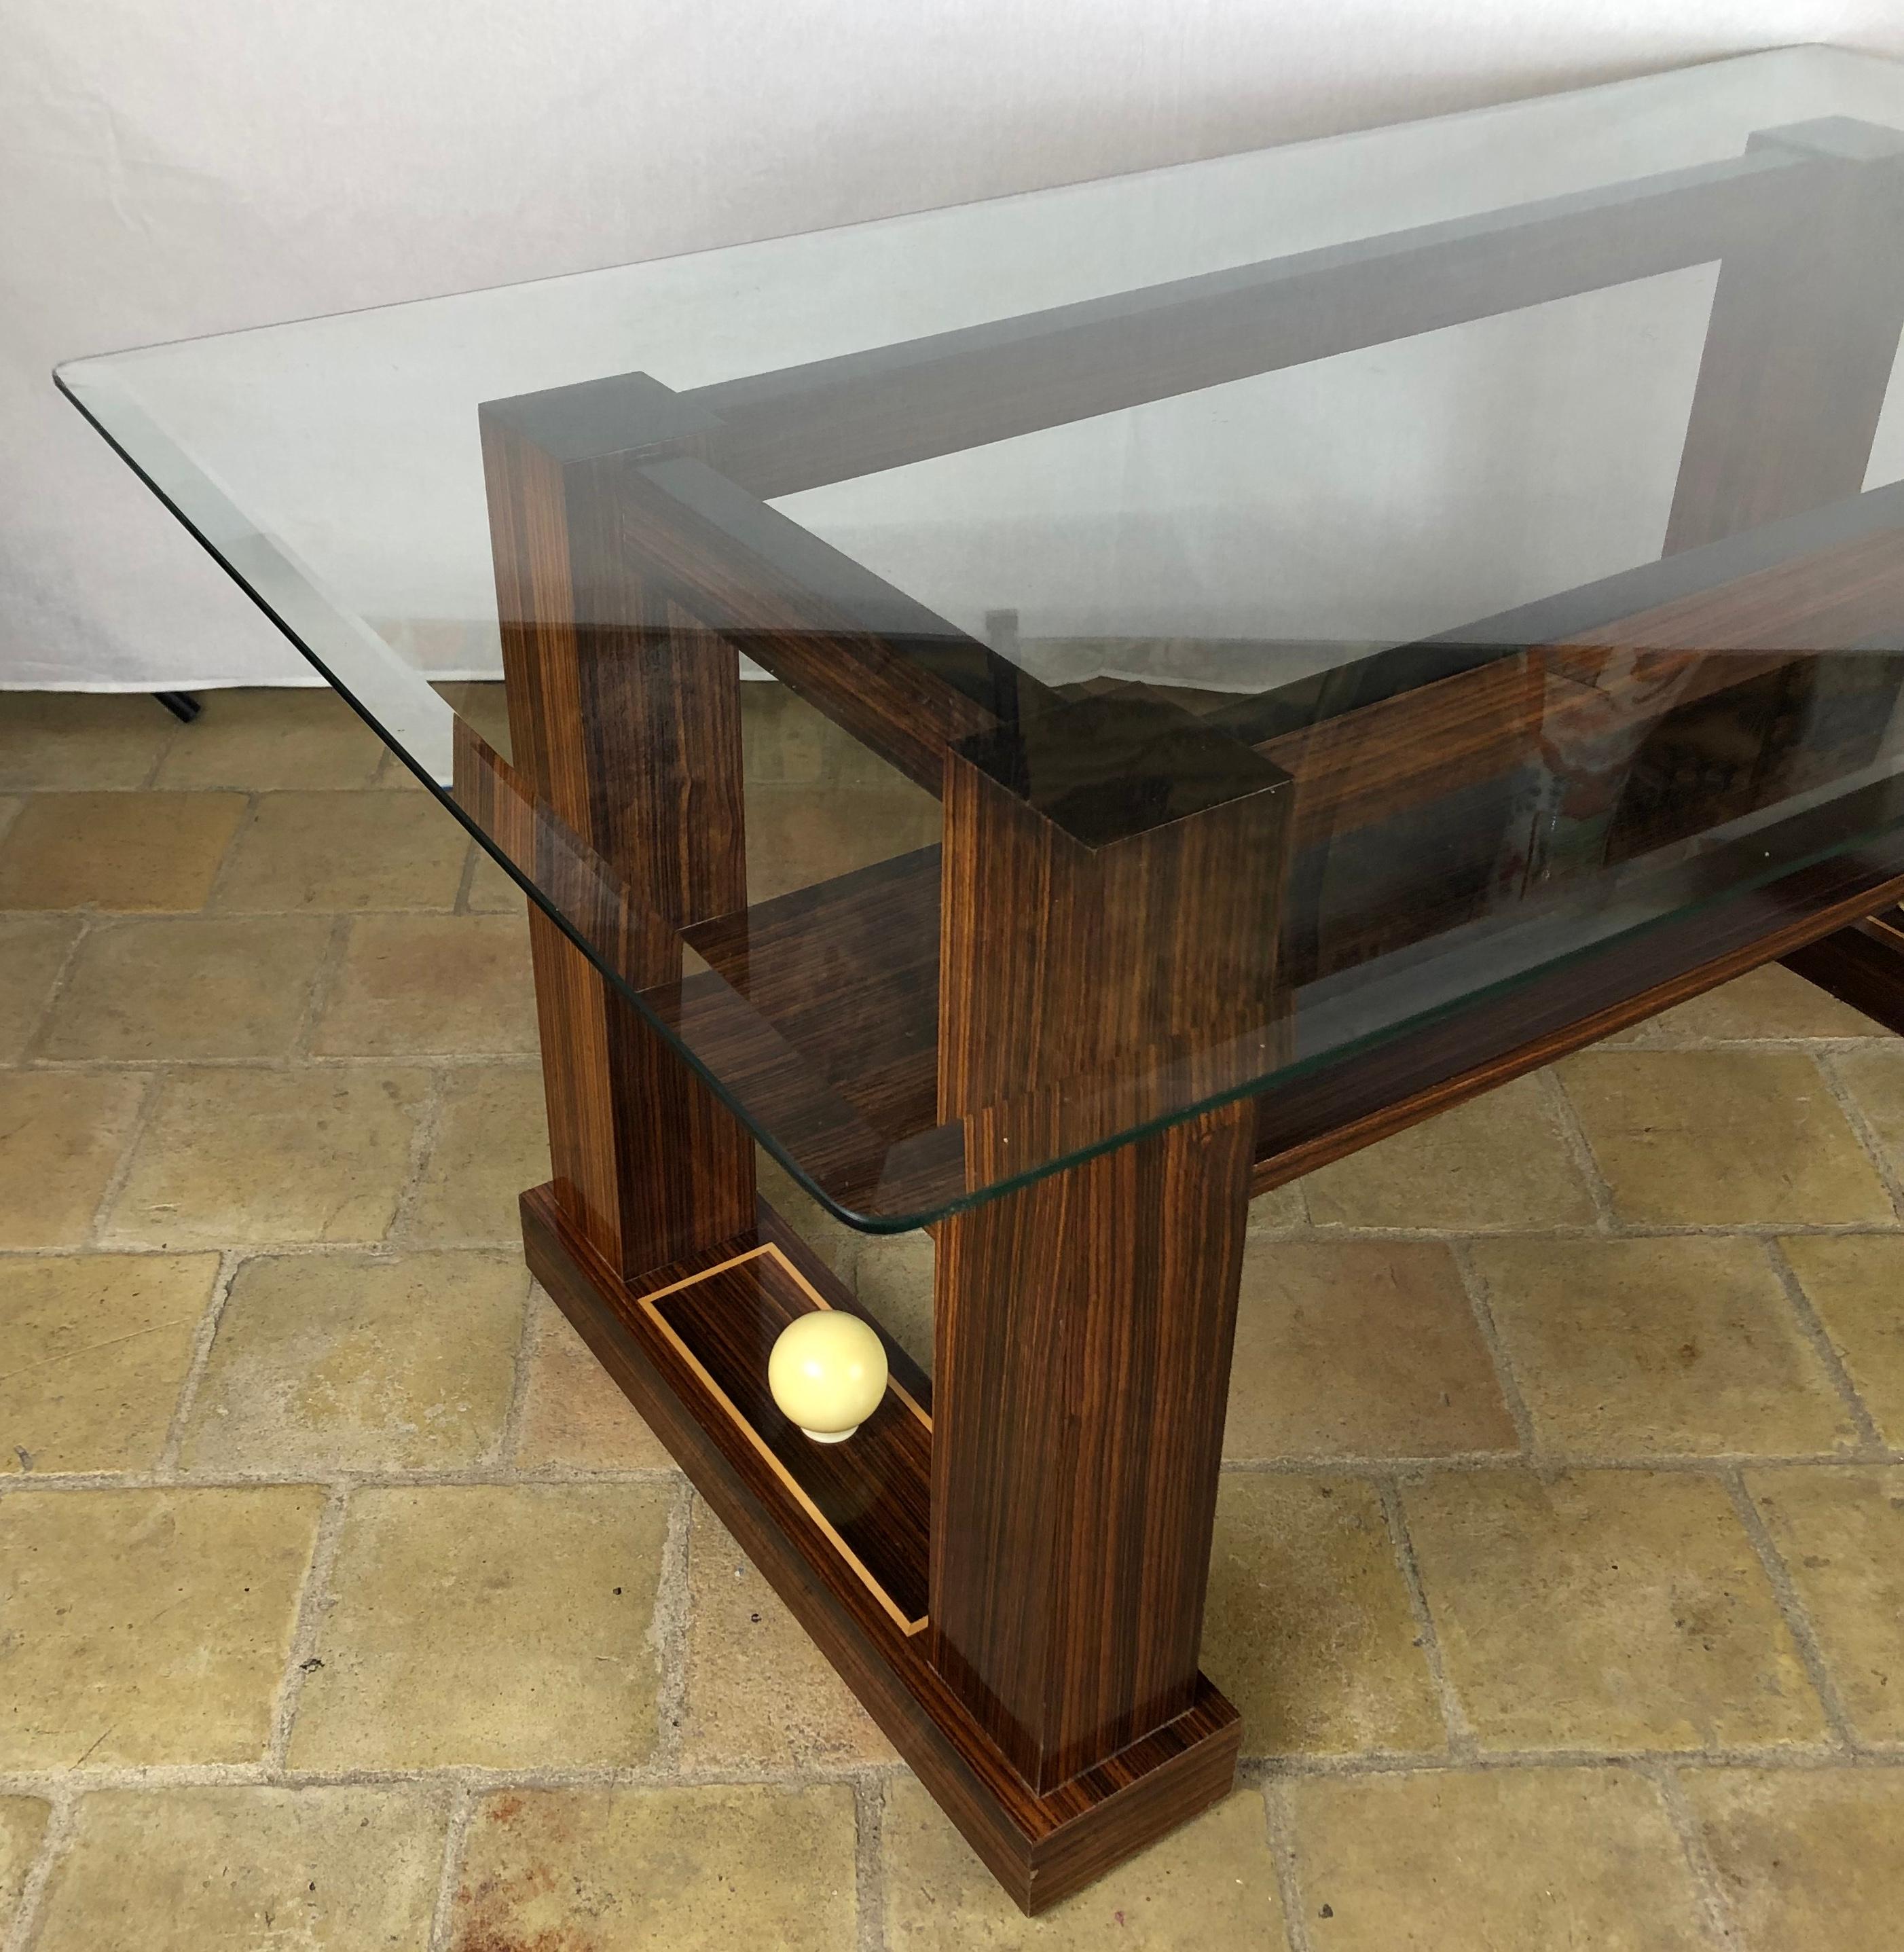 20th Century French Art Deco Style Two-Tiered Rosewood Coffee Table with Glass Top